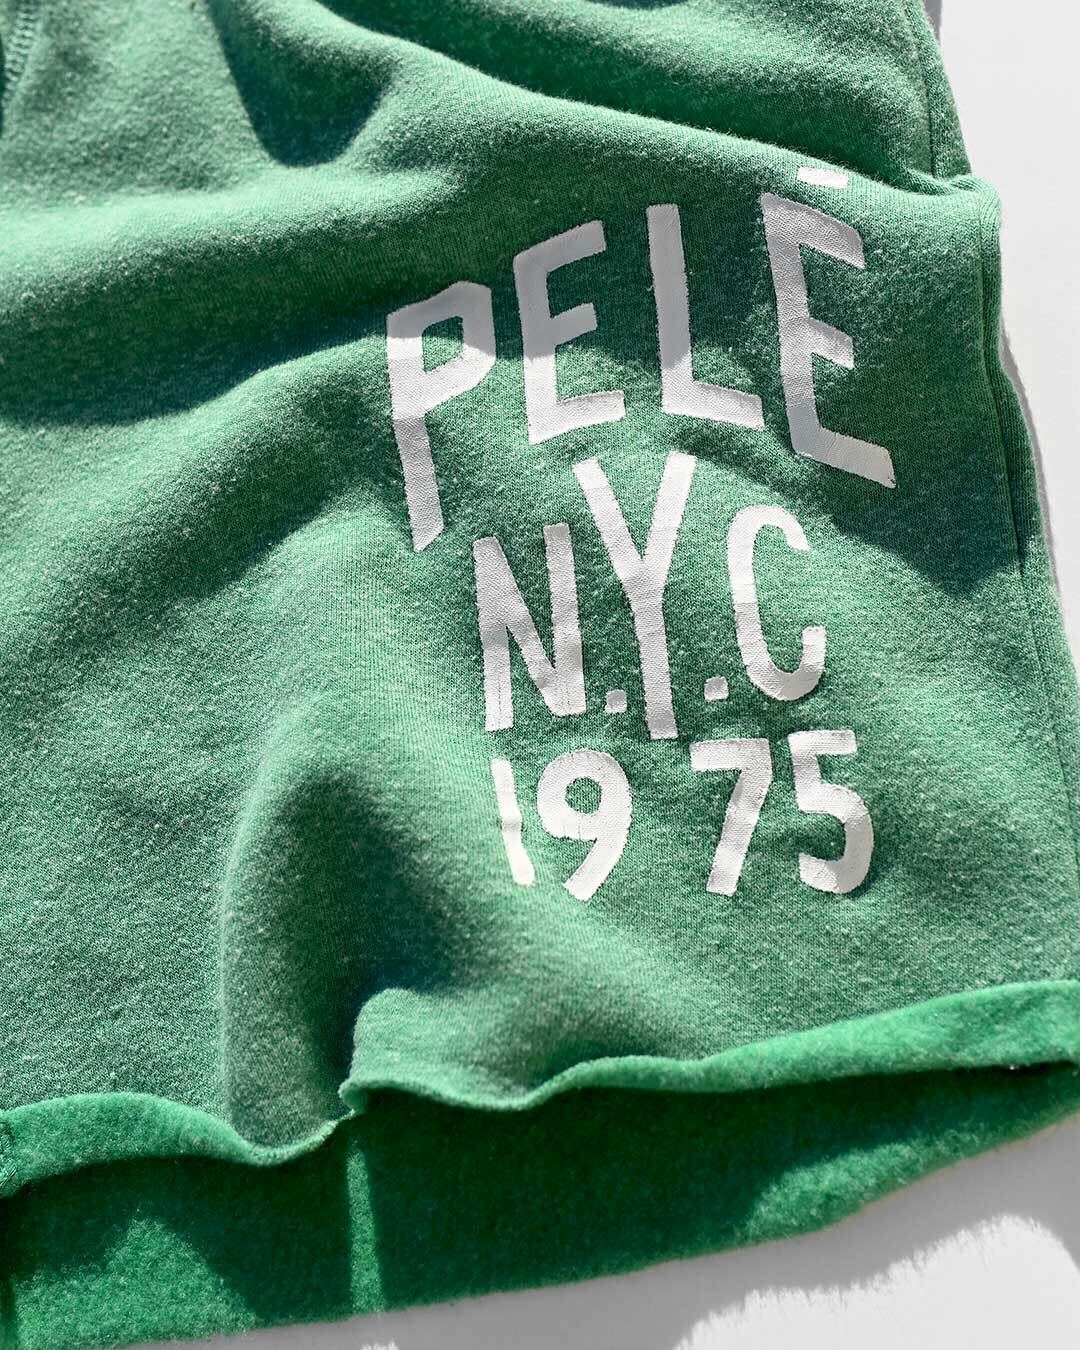 Pelé NYC 1975 Green Shorts - Roots of Fight Canada